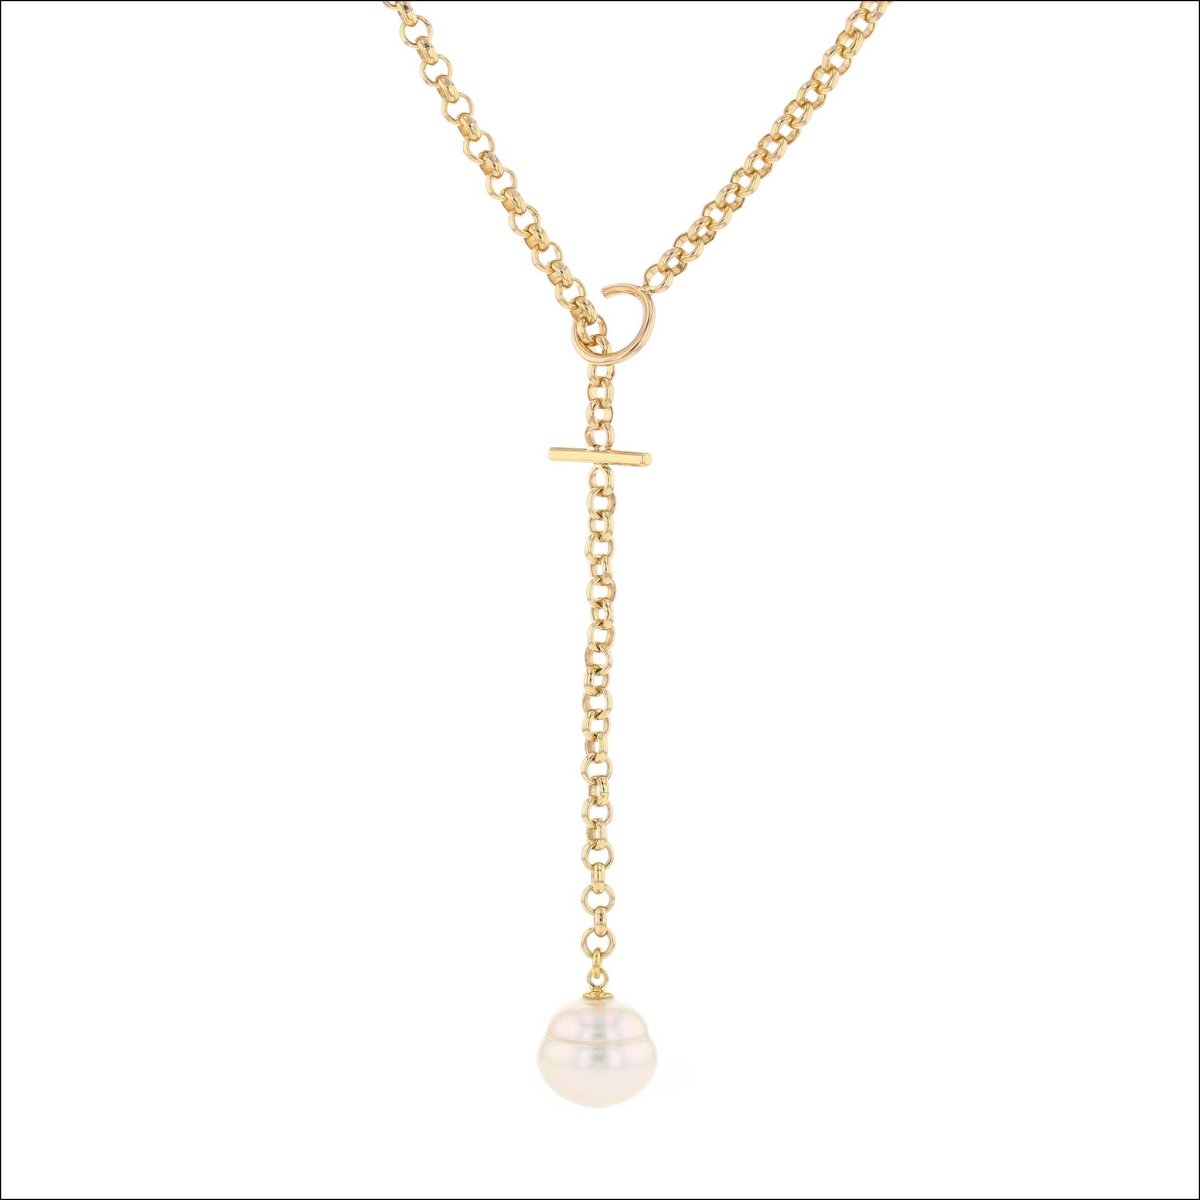 White South Sea Pearl Lariat Toggle Necklace 14KY - JewelsmithNecklaces